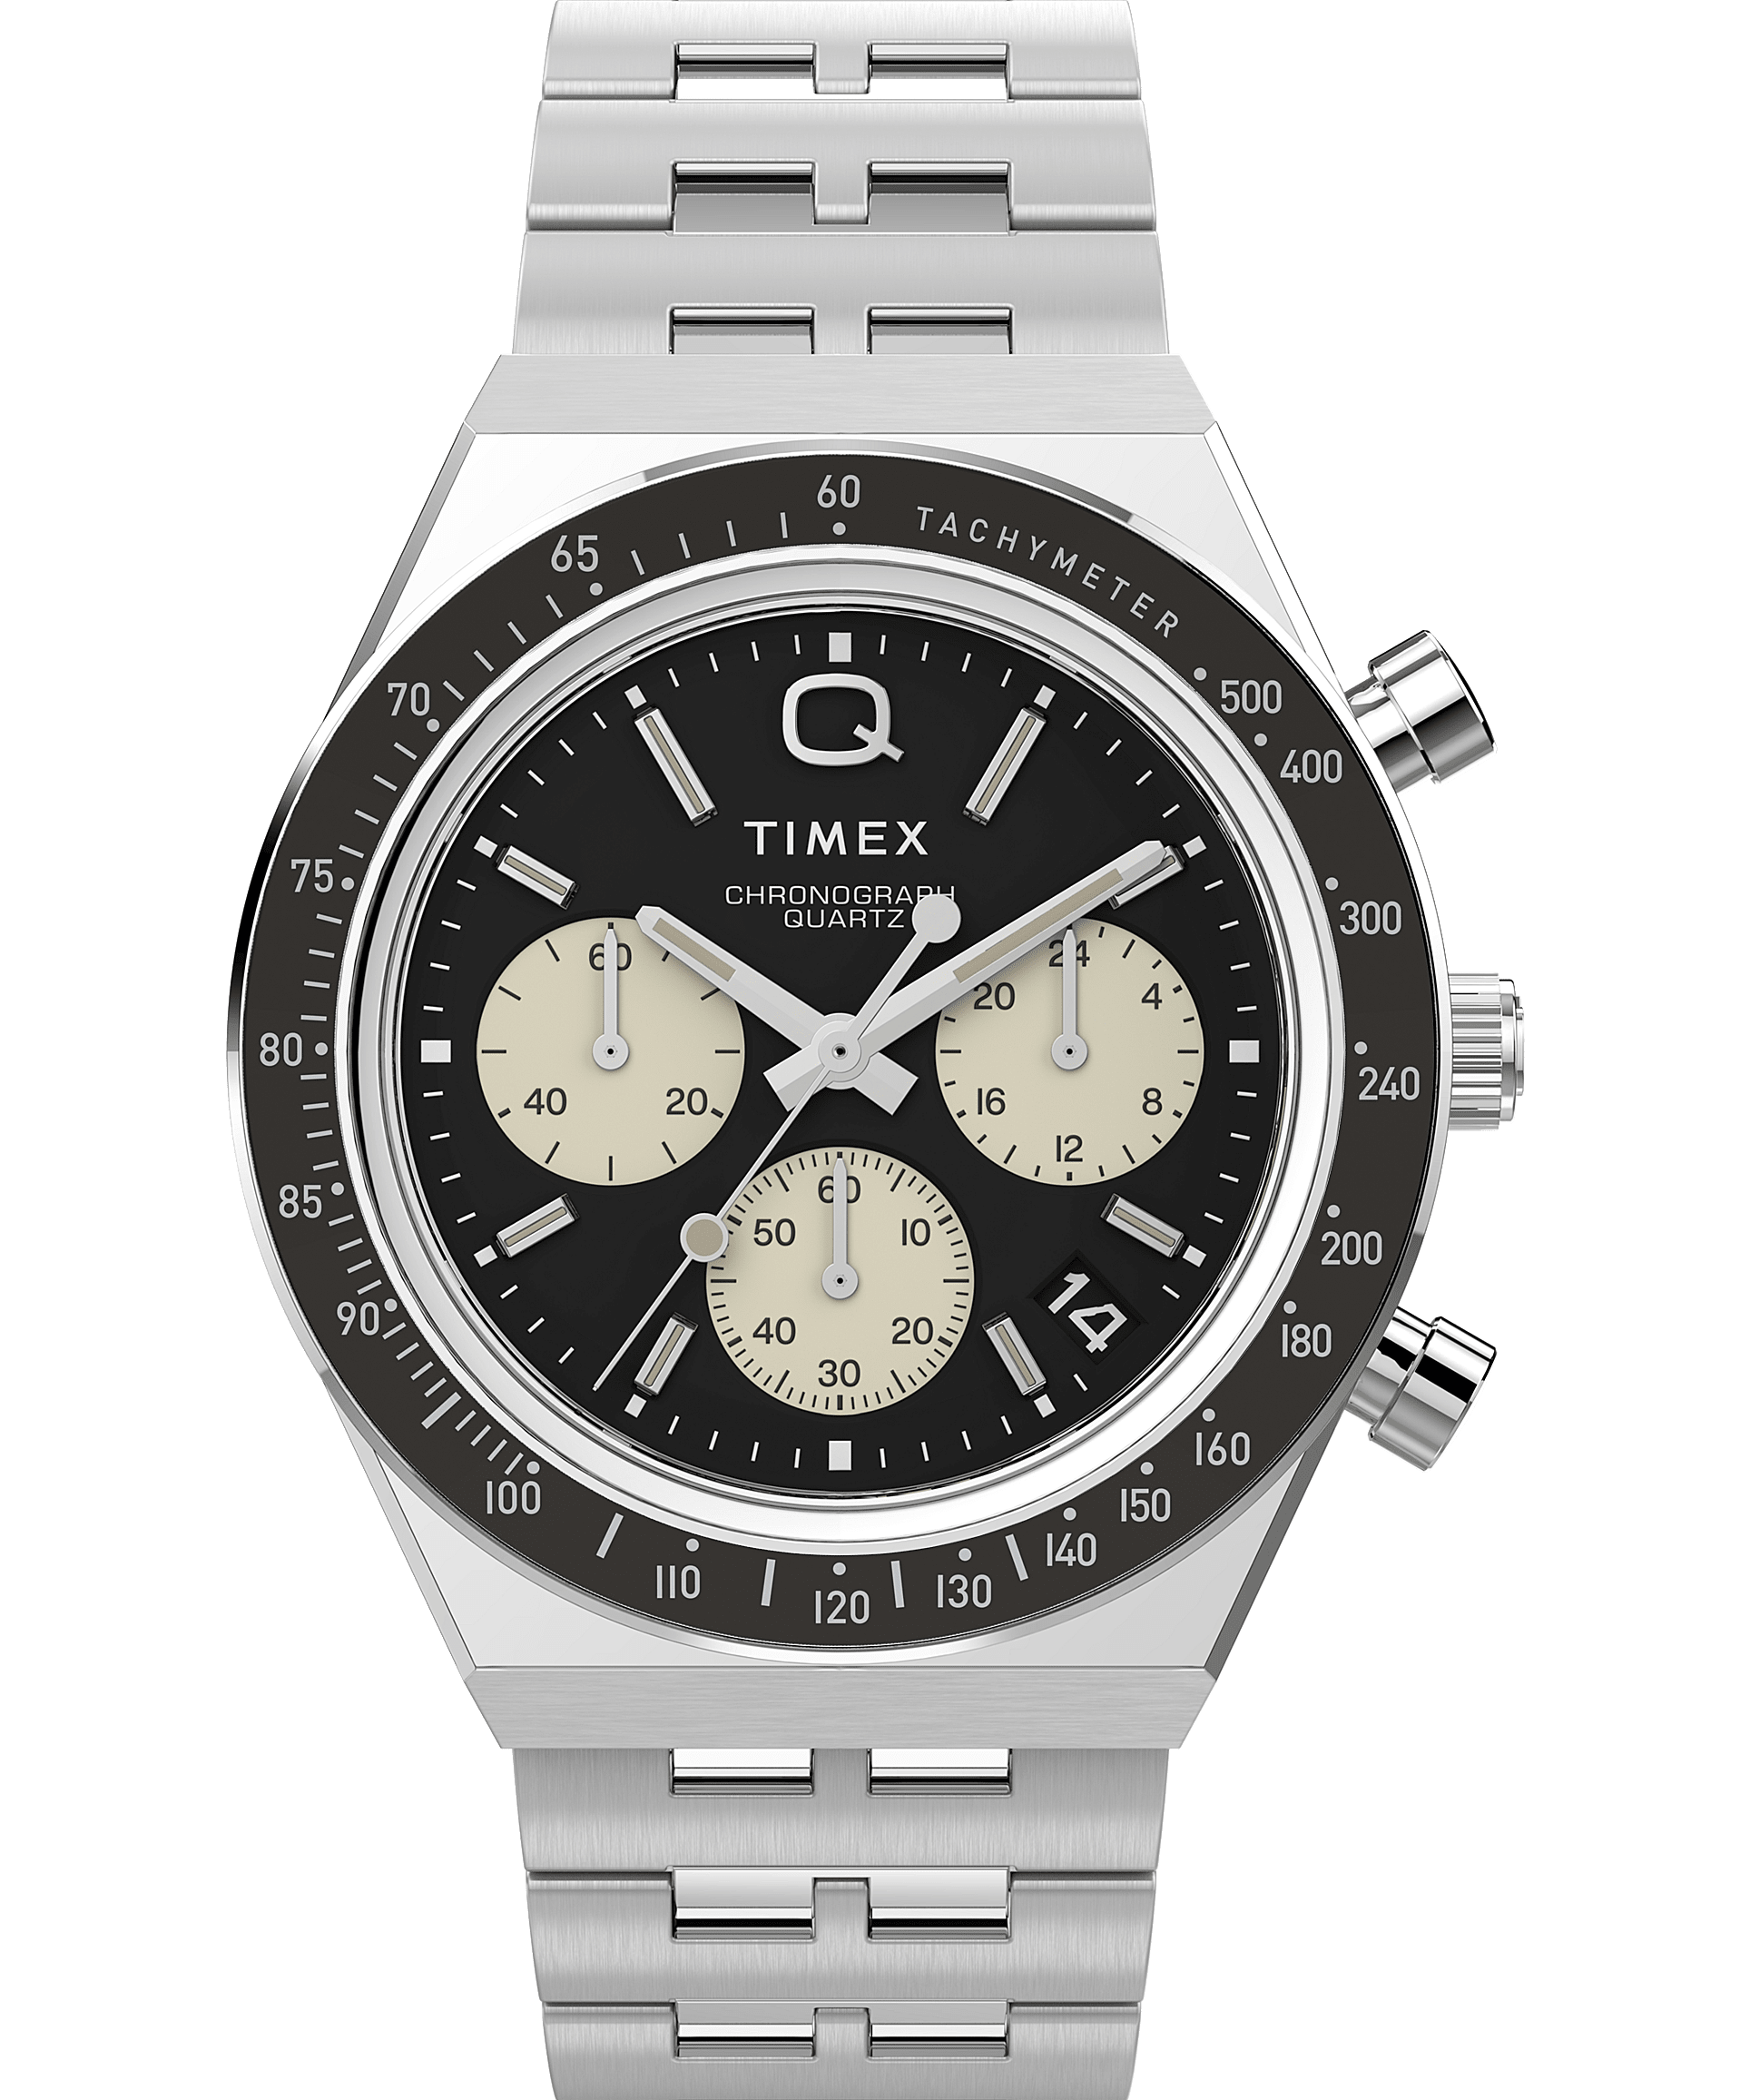 Q Timex Chronograph 40mm Stainless Steel Bracelet Watch - Timex US